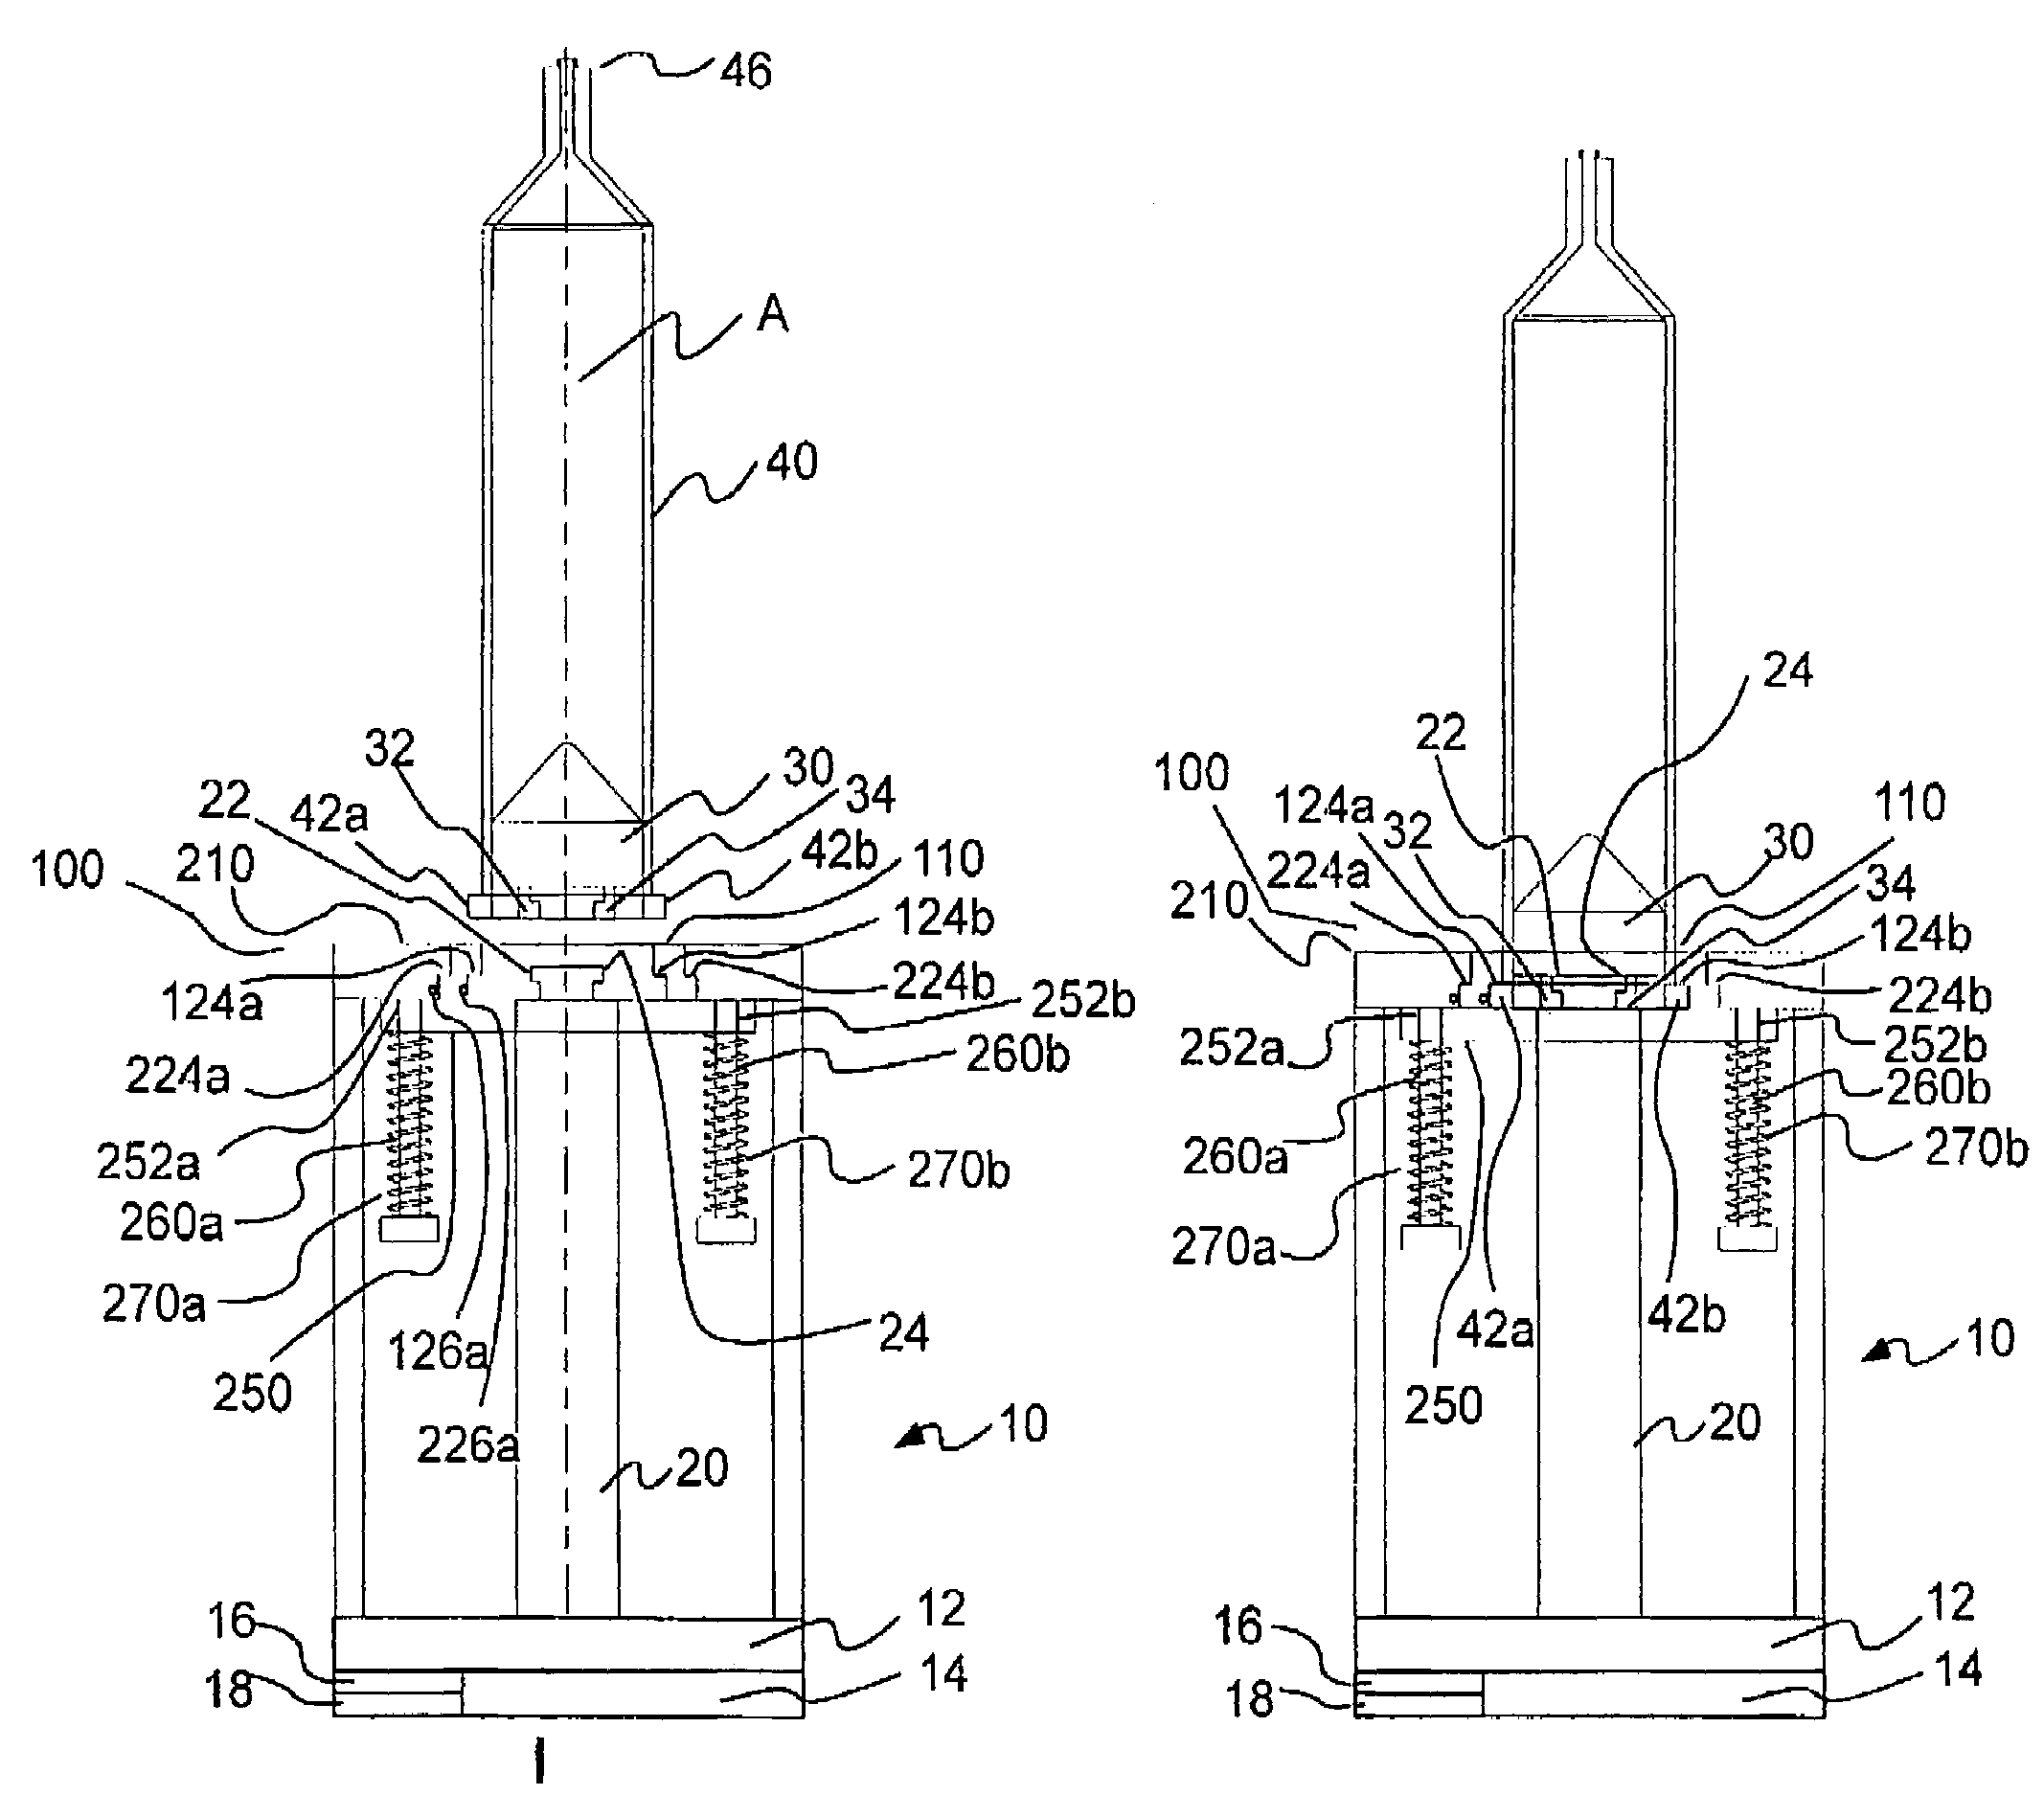 Injectors and syringe interfaces for syringes of variable size